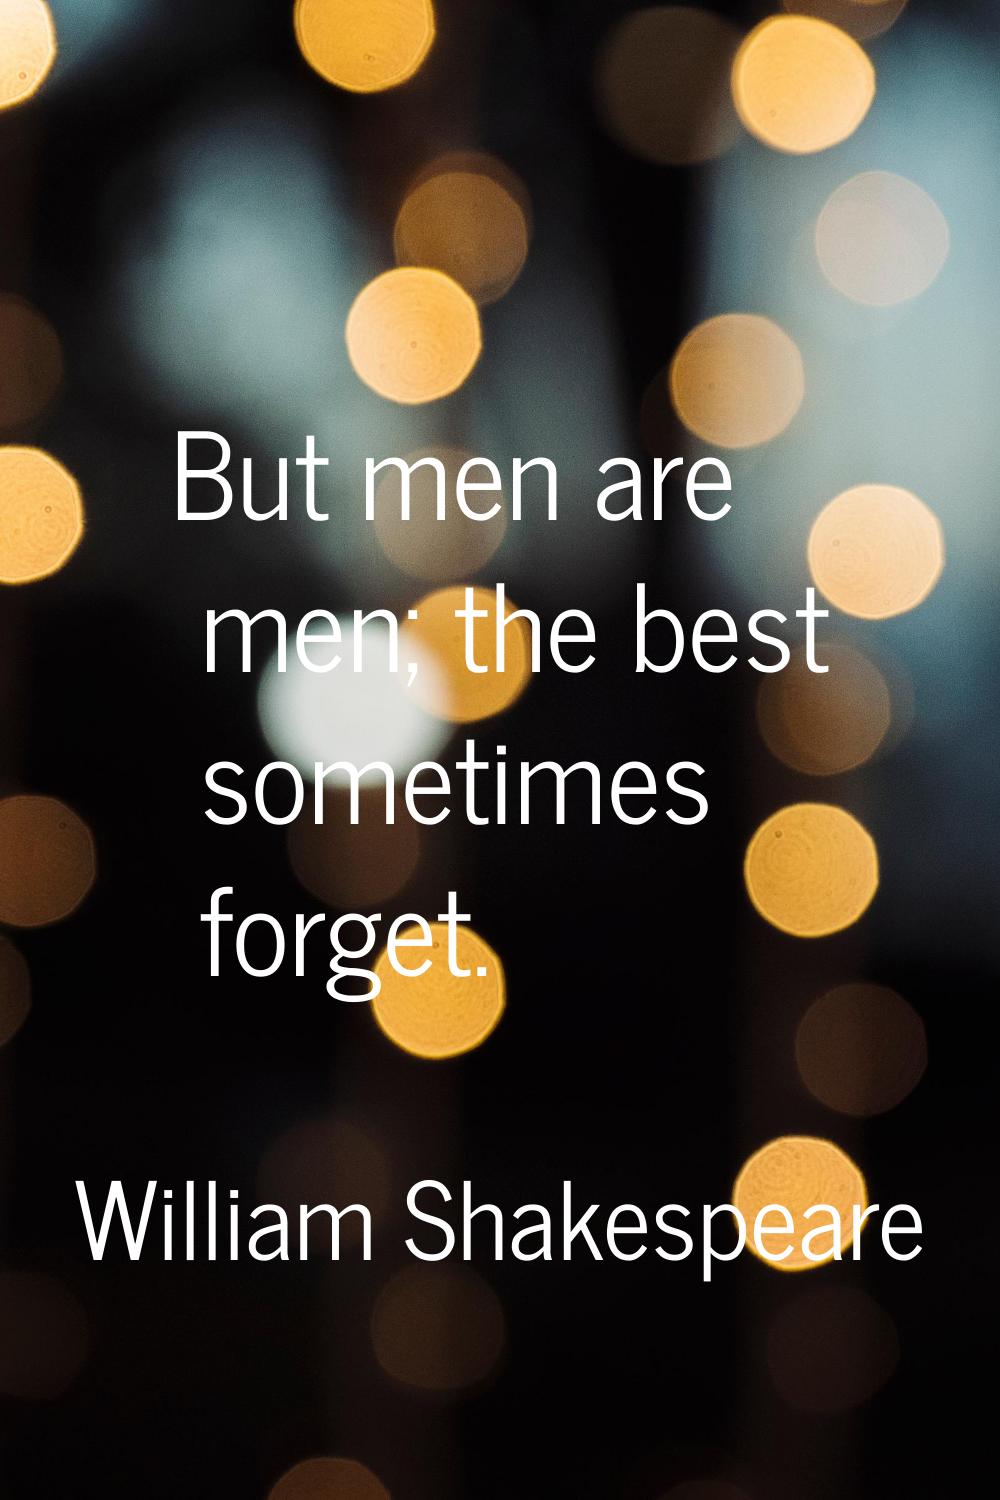 But men are men; the best sometimes forget.